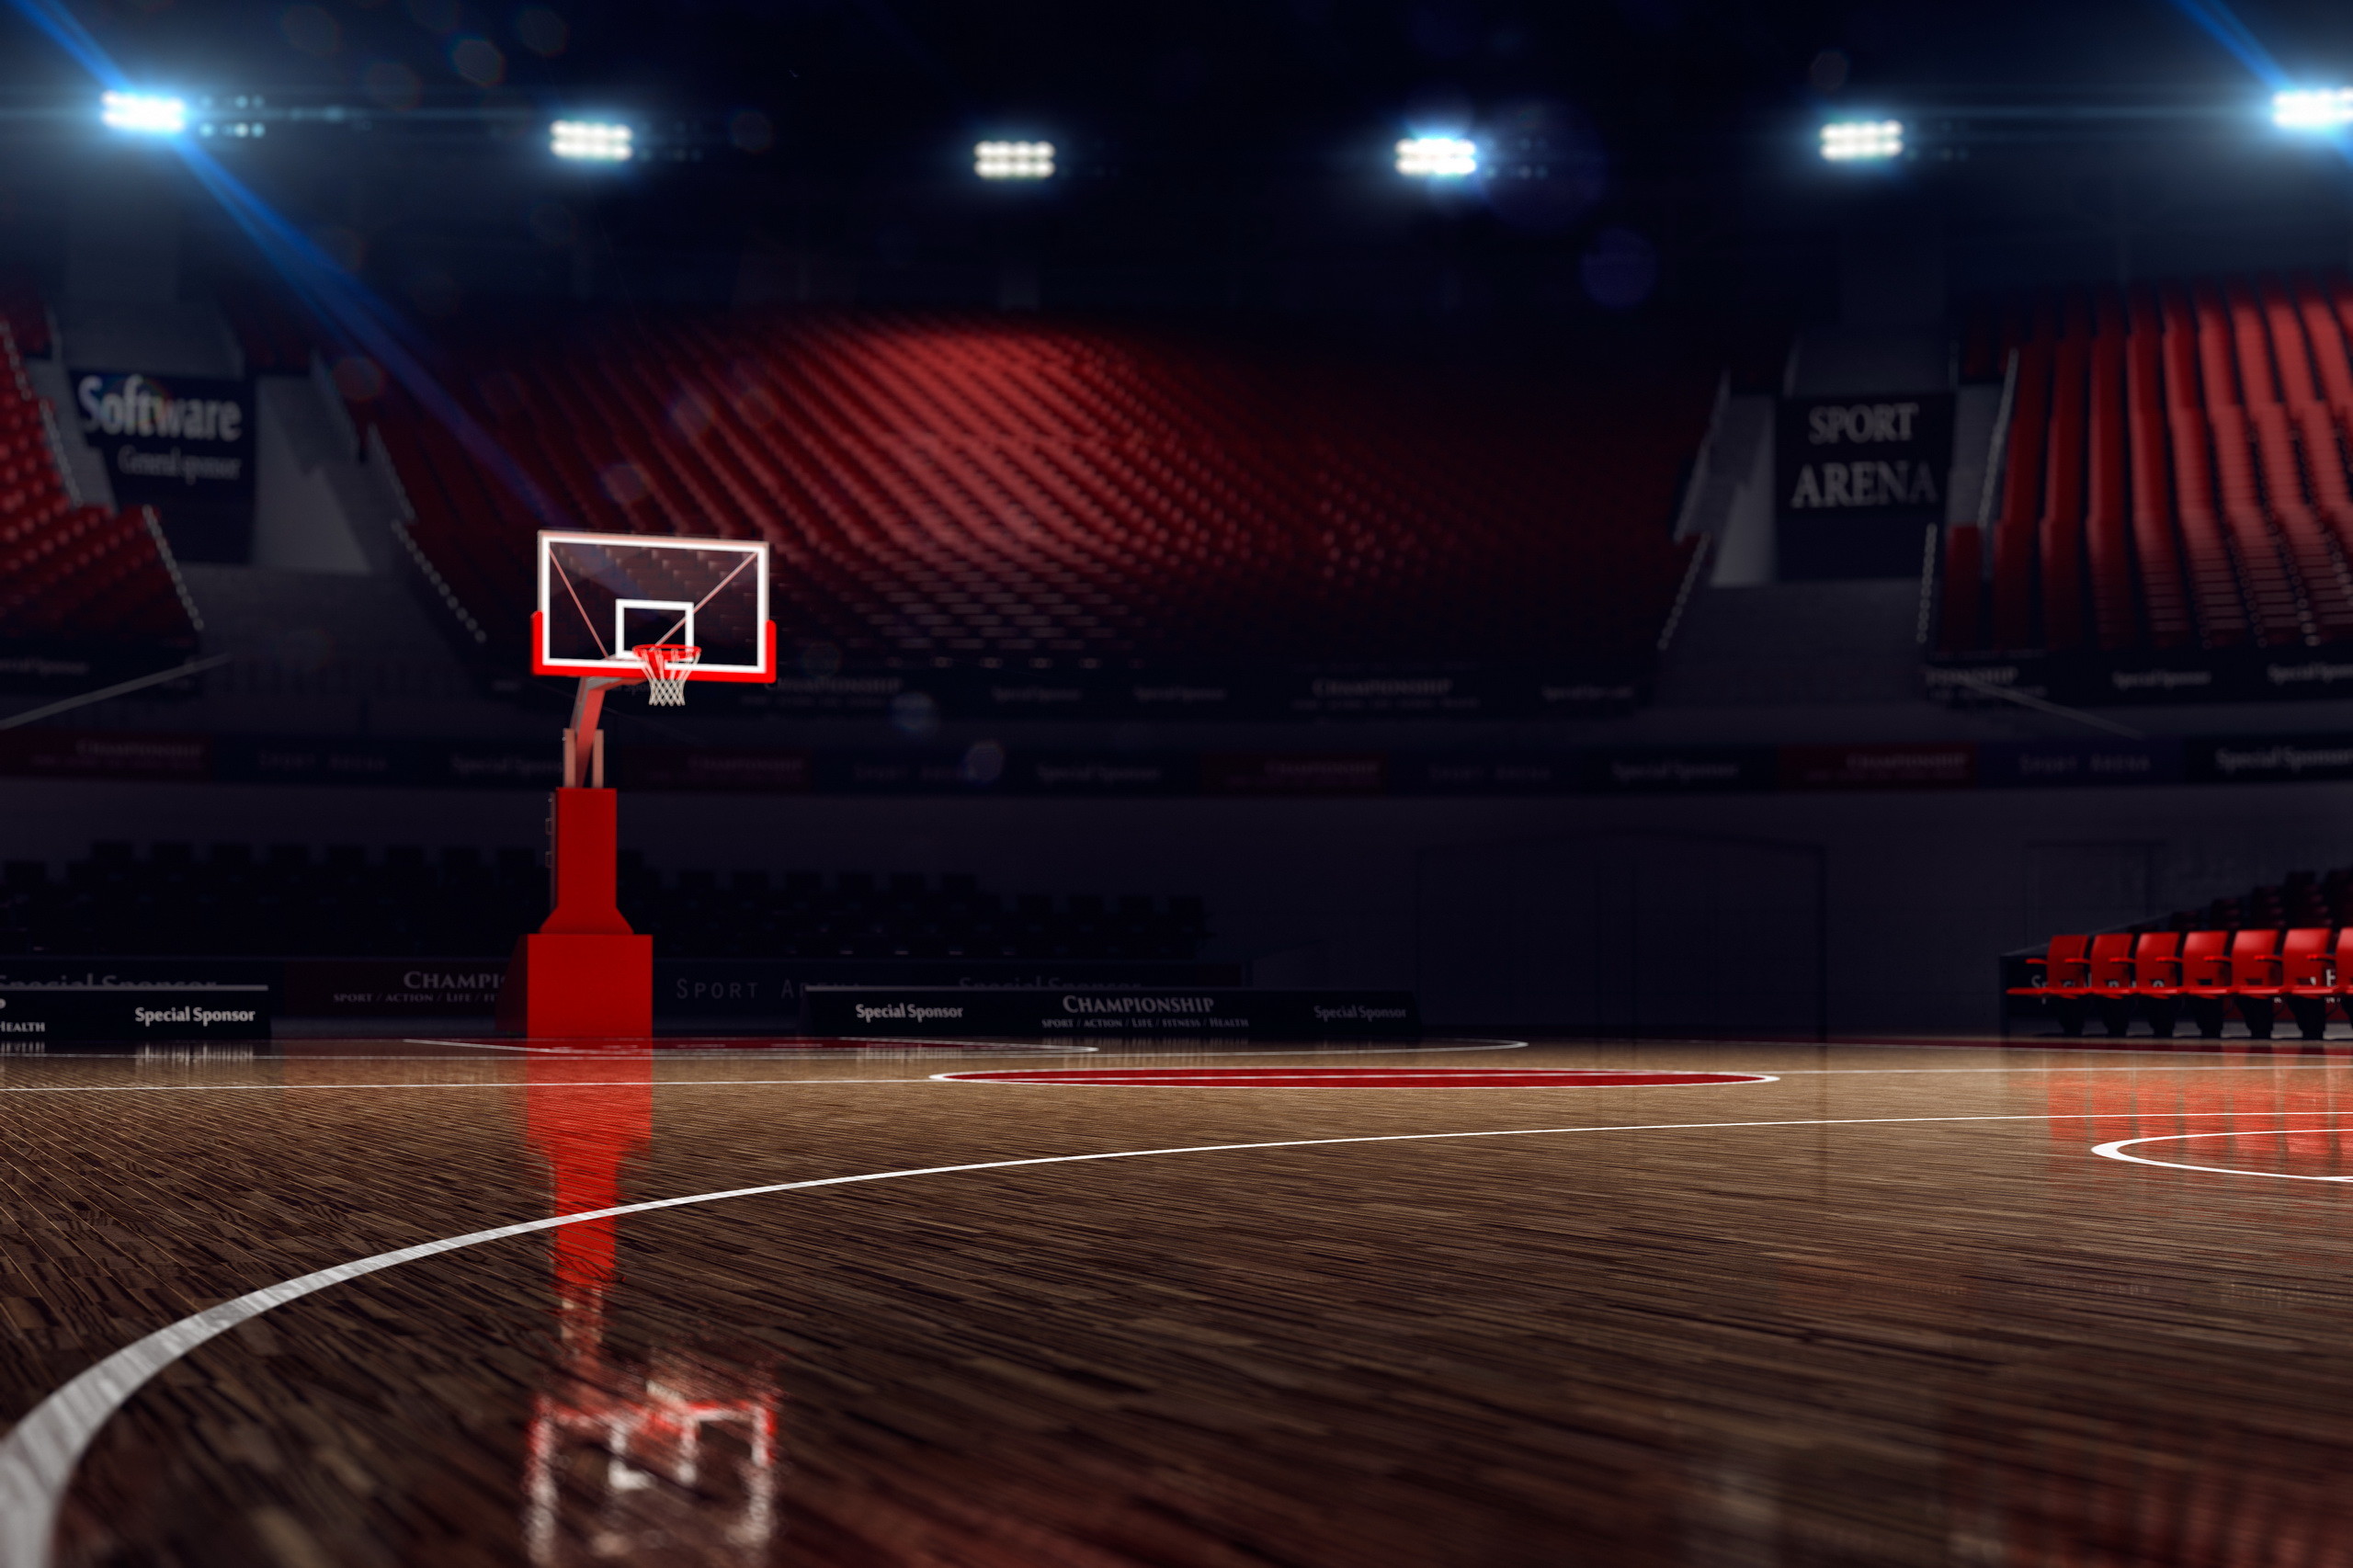 High Definition Basketball Court Background Wallpaper | Search ImageJpg